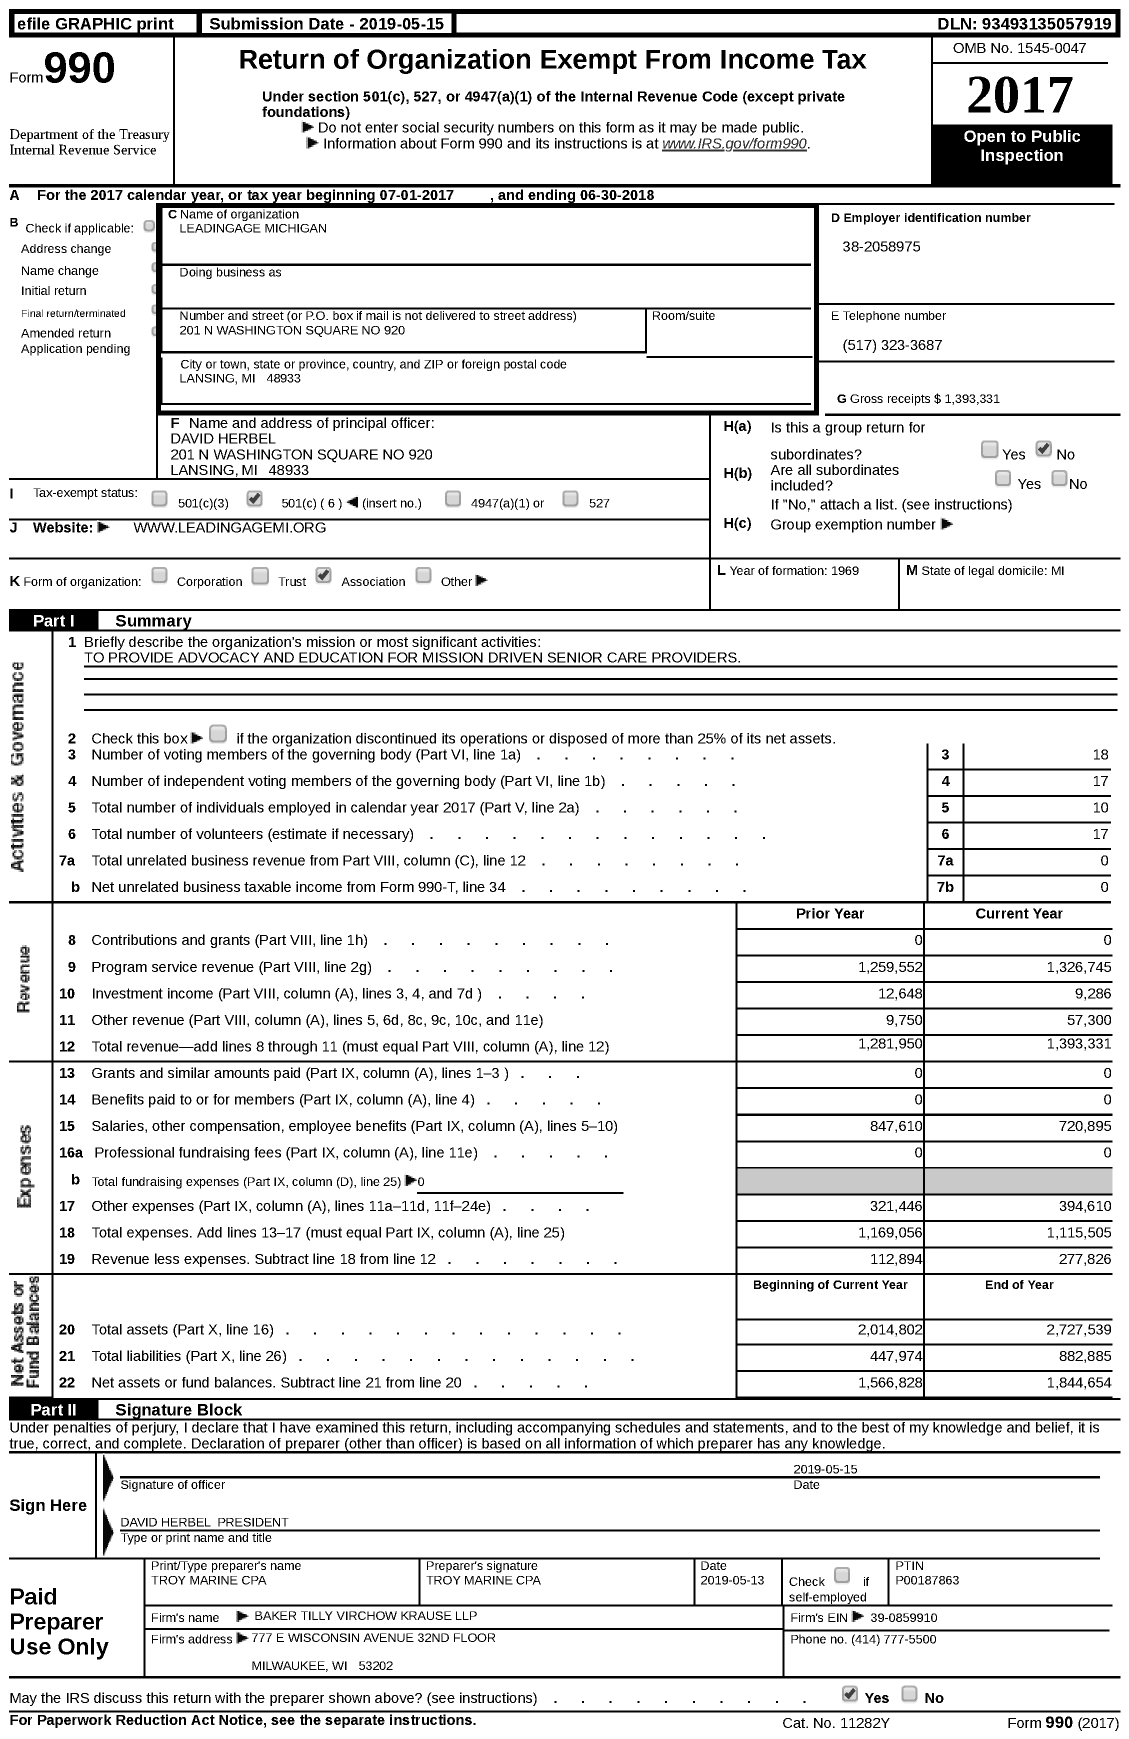 Image of first page of 2017 Form 990 for Leadingage Michigan